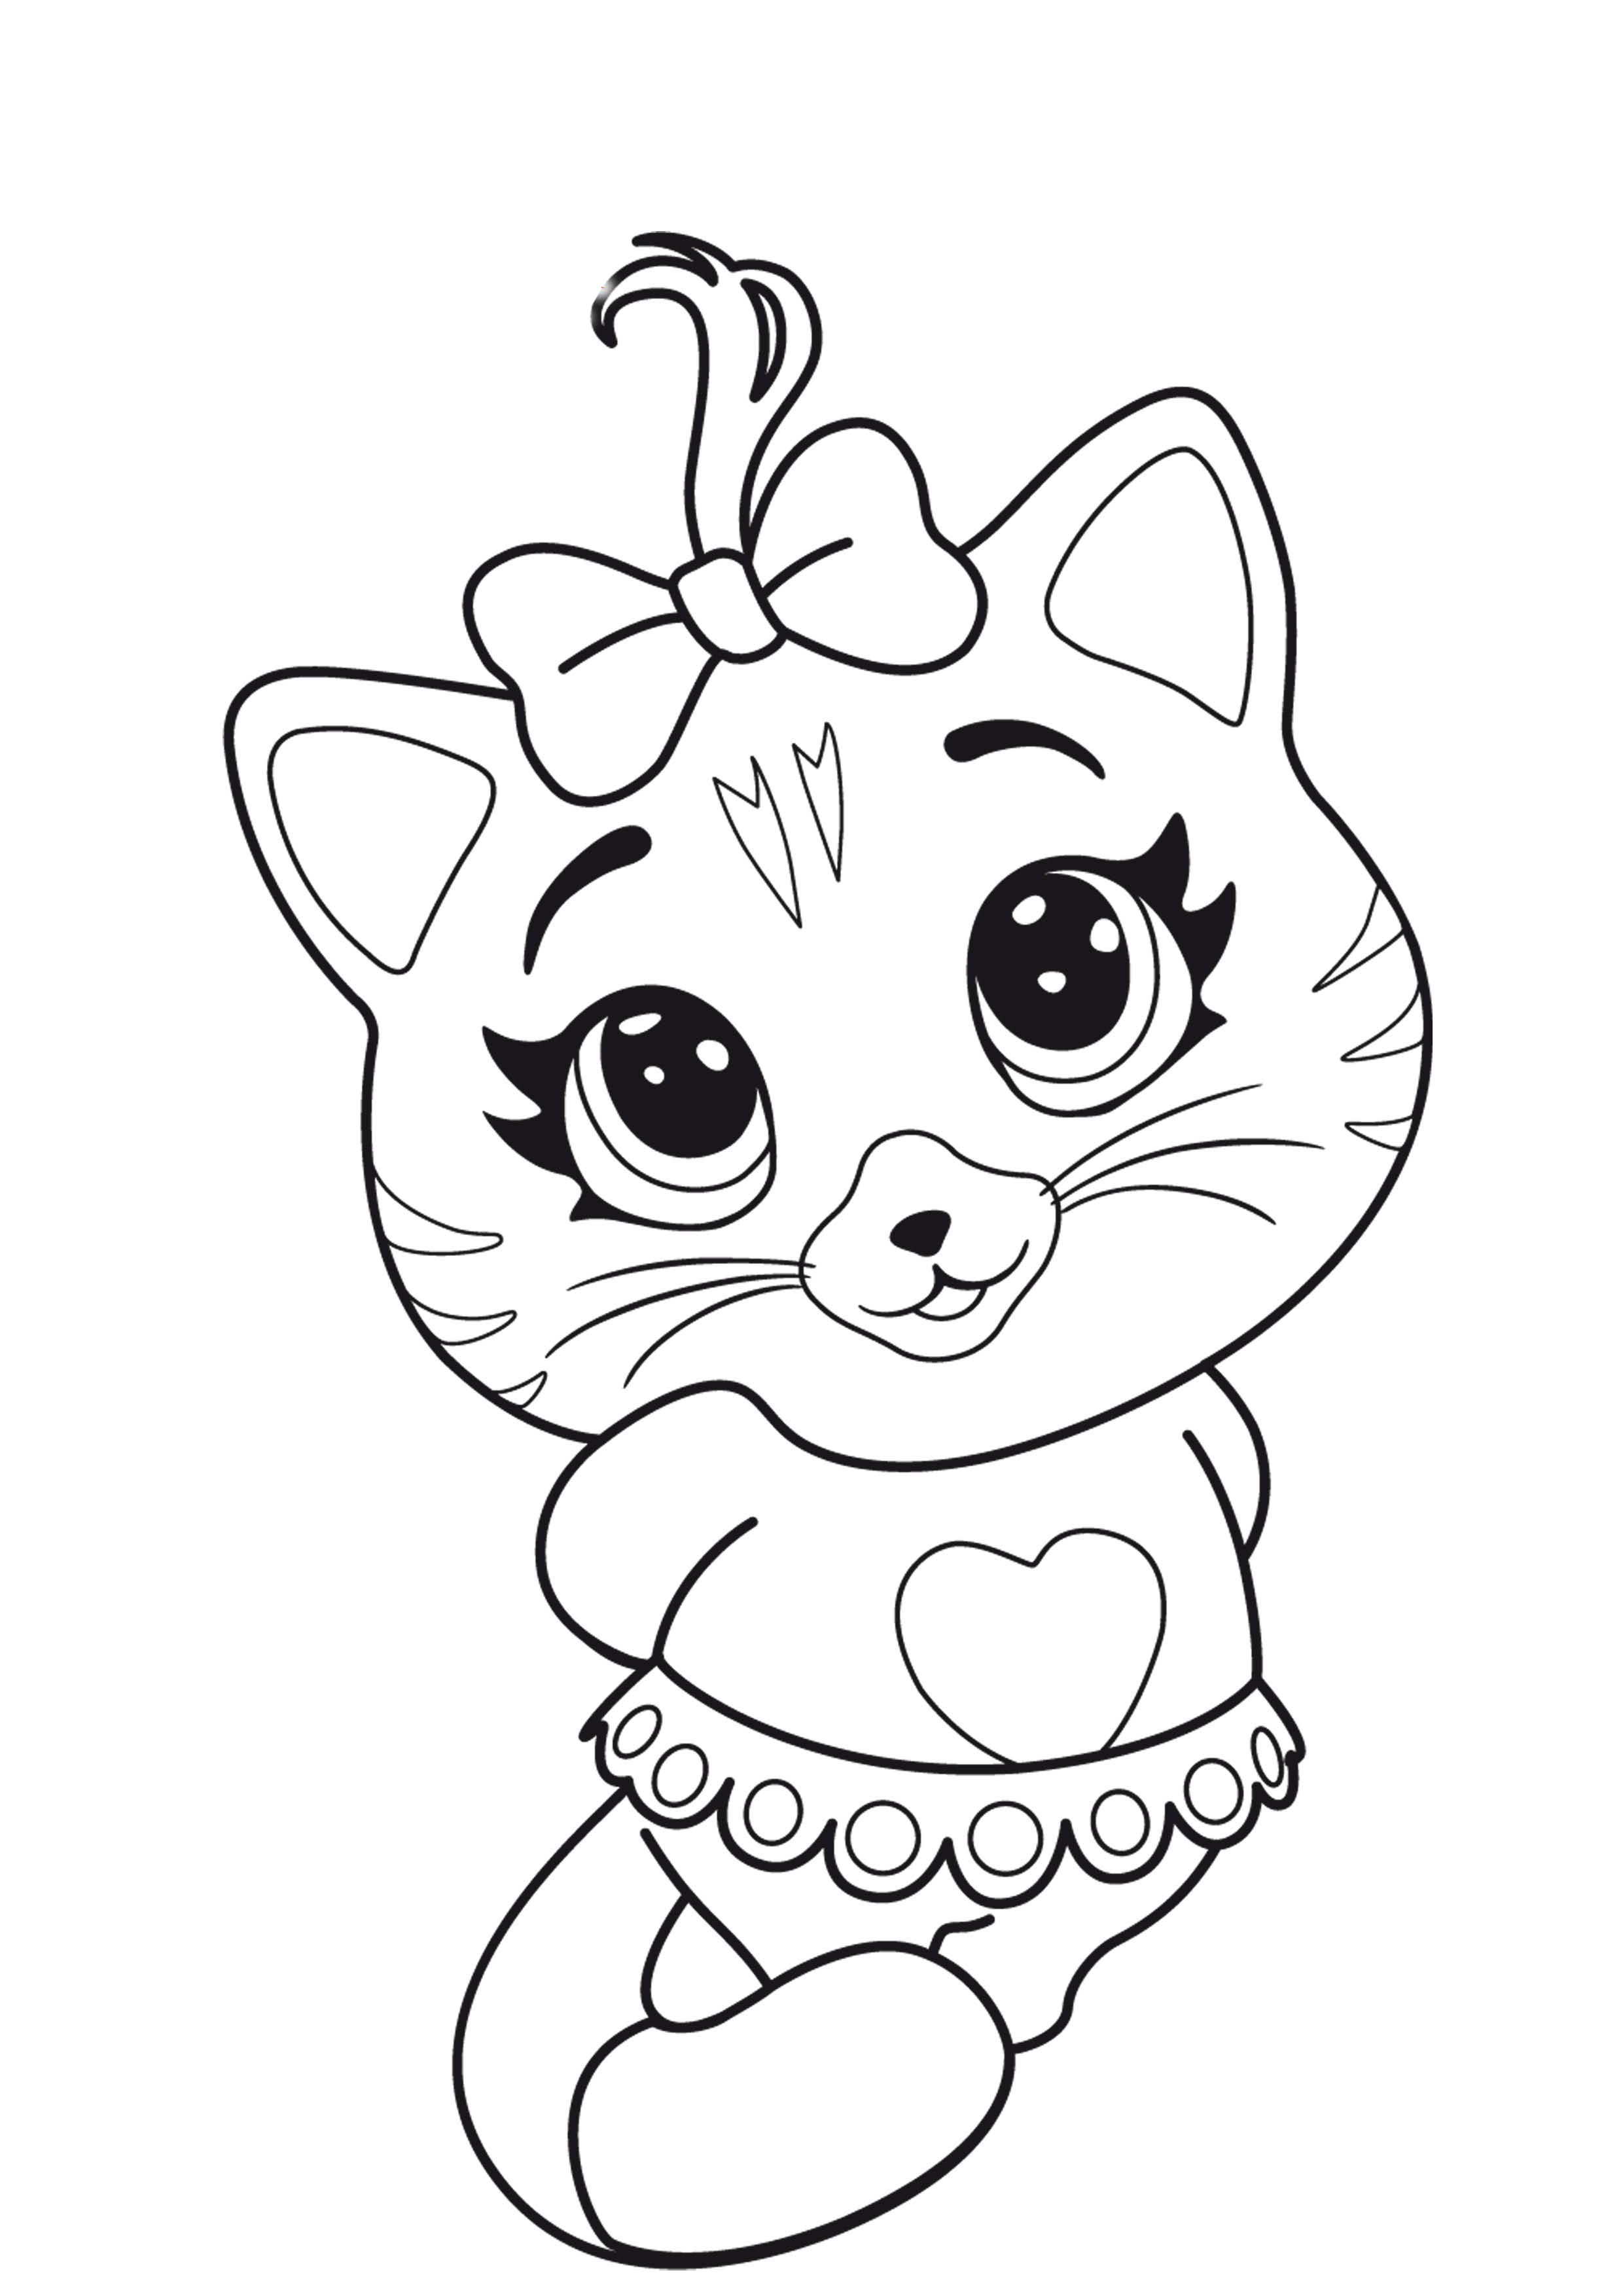 Free 44 Cats coloring pages   YouLoveIt.com